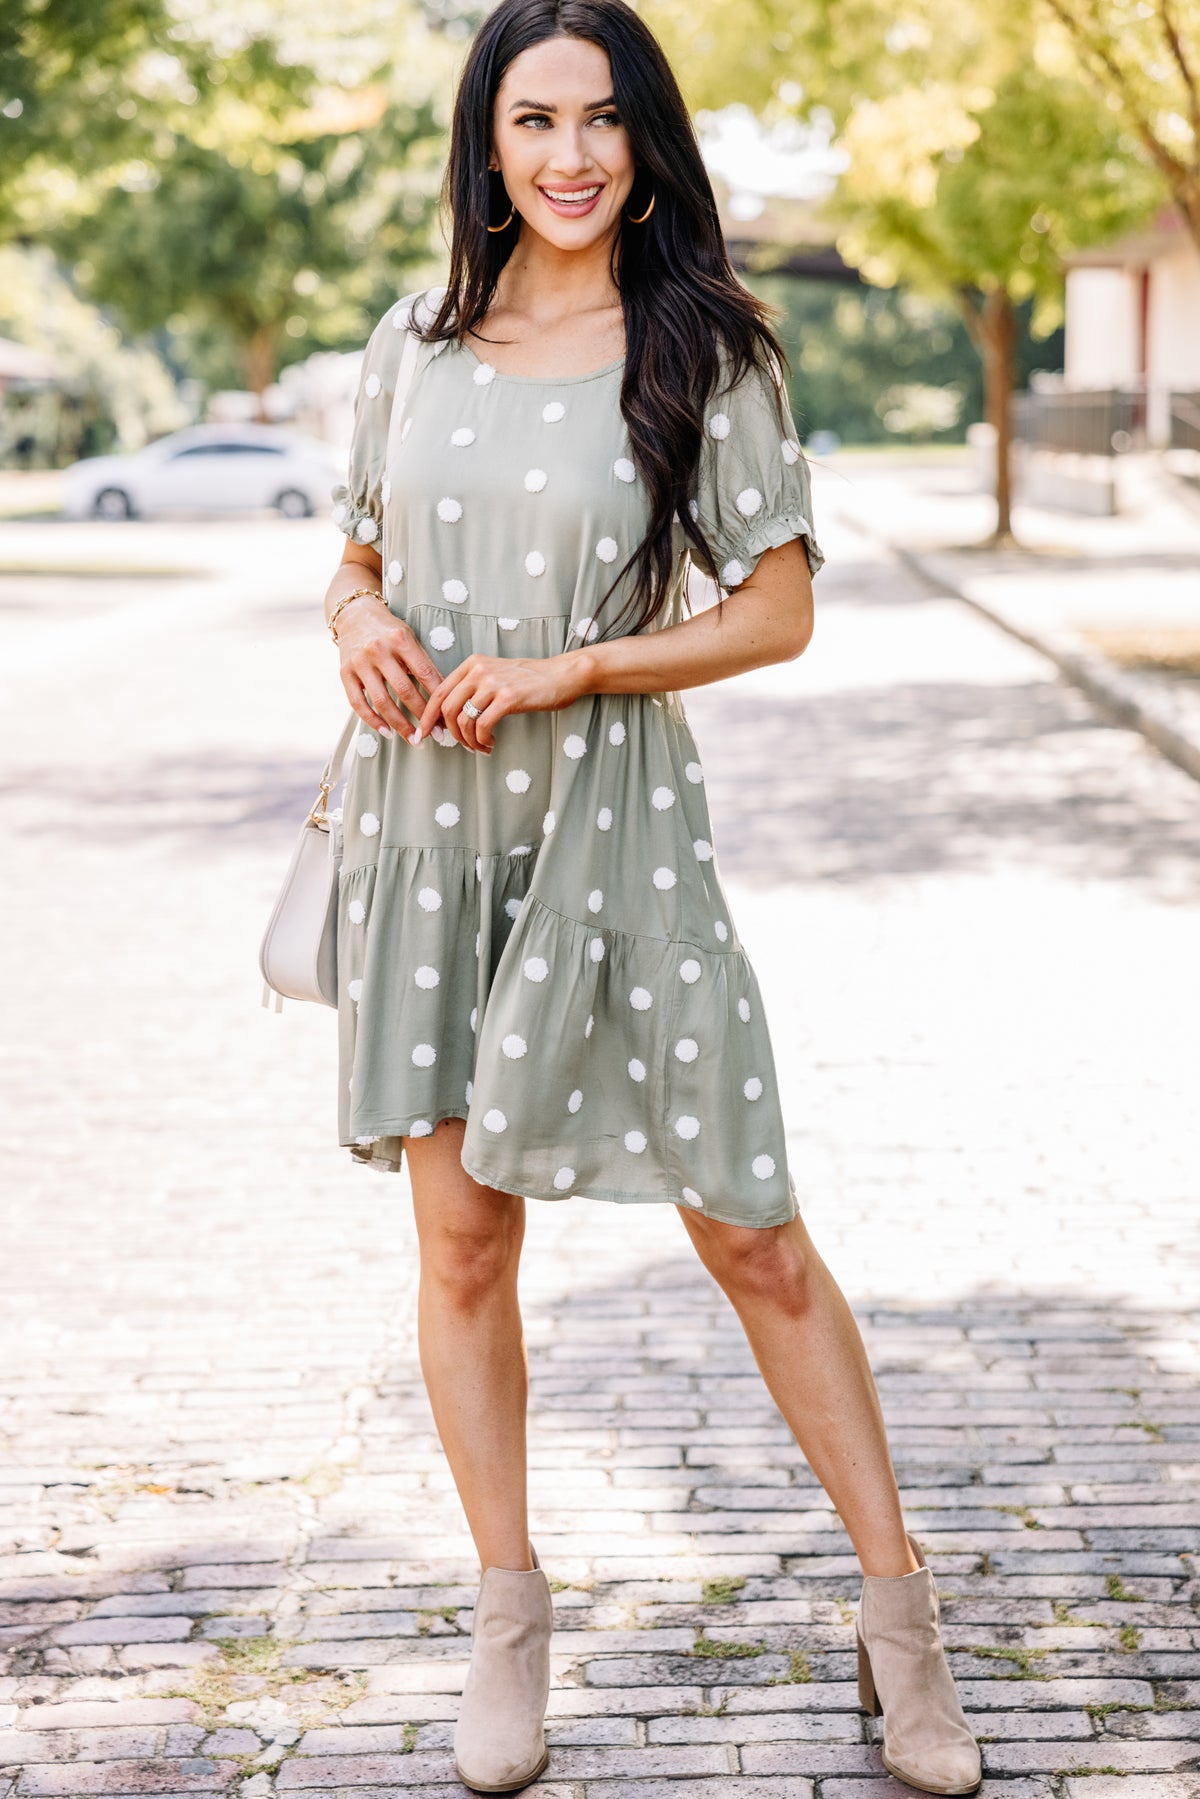 Out Of Your Way Olive Green Polka Dot Dress – Shop the Mint